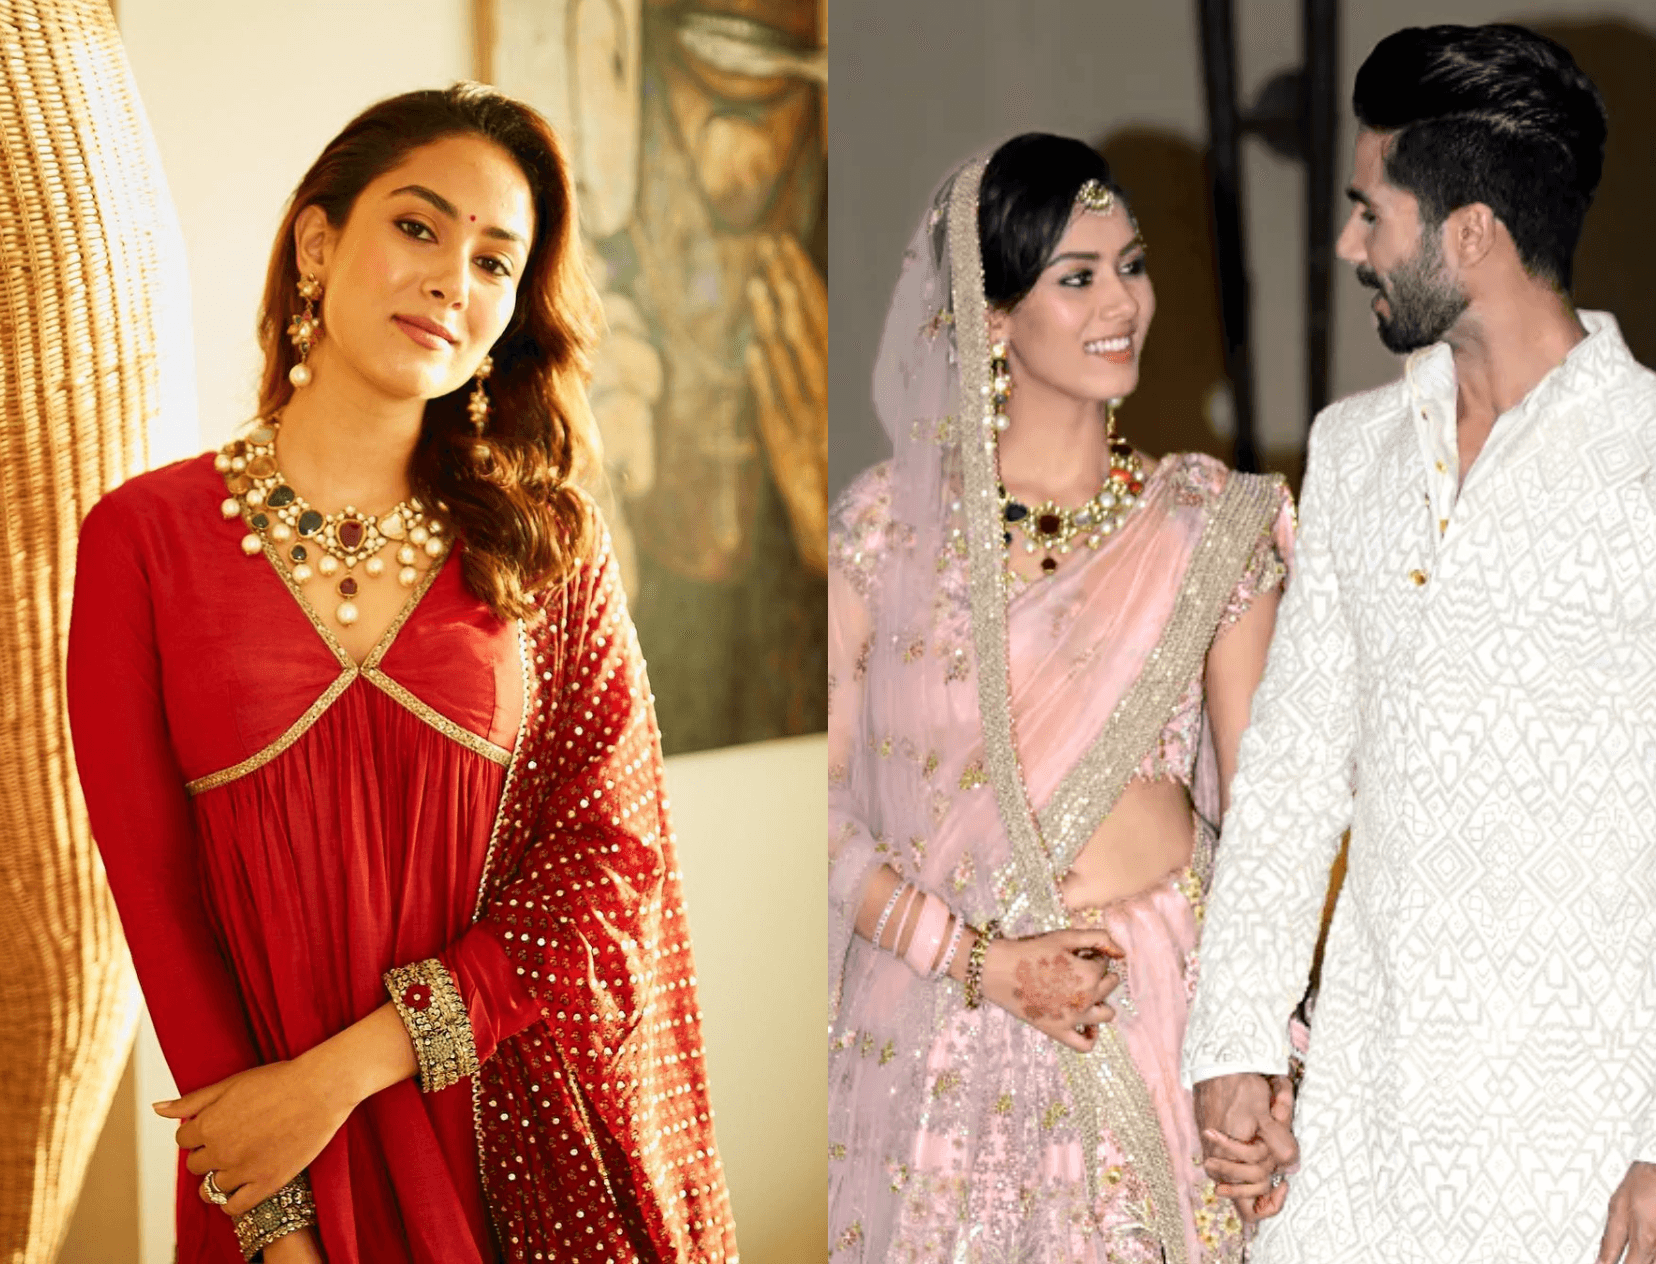 Mira Kapoor Re-Wore Her Wedding Jewellery &amp; We Love How She Styled It!